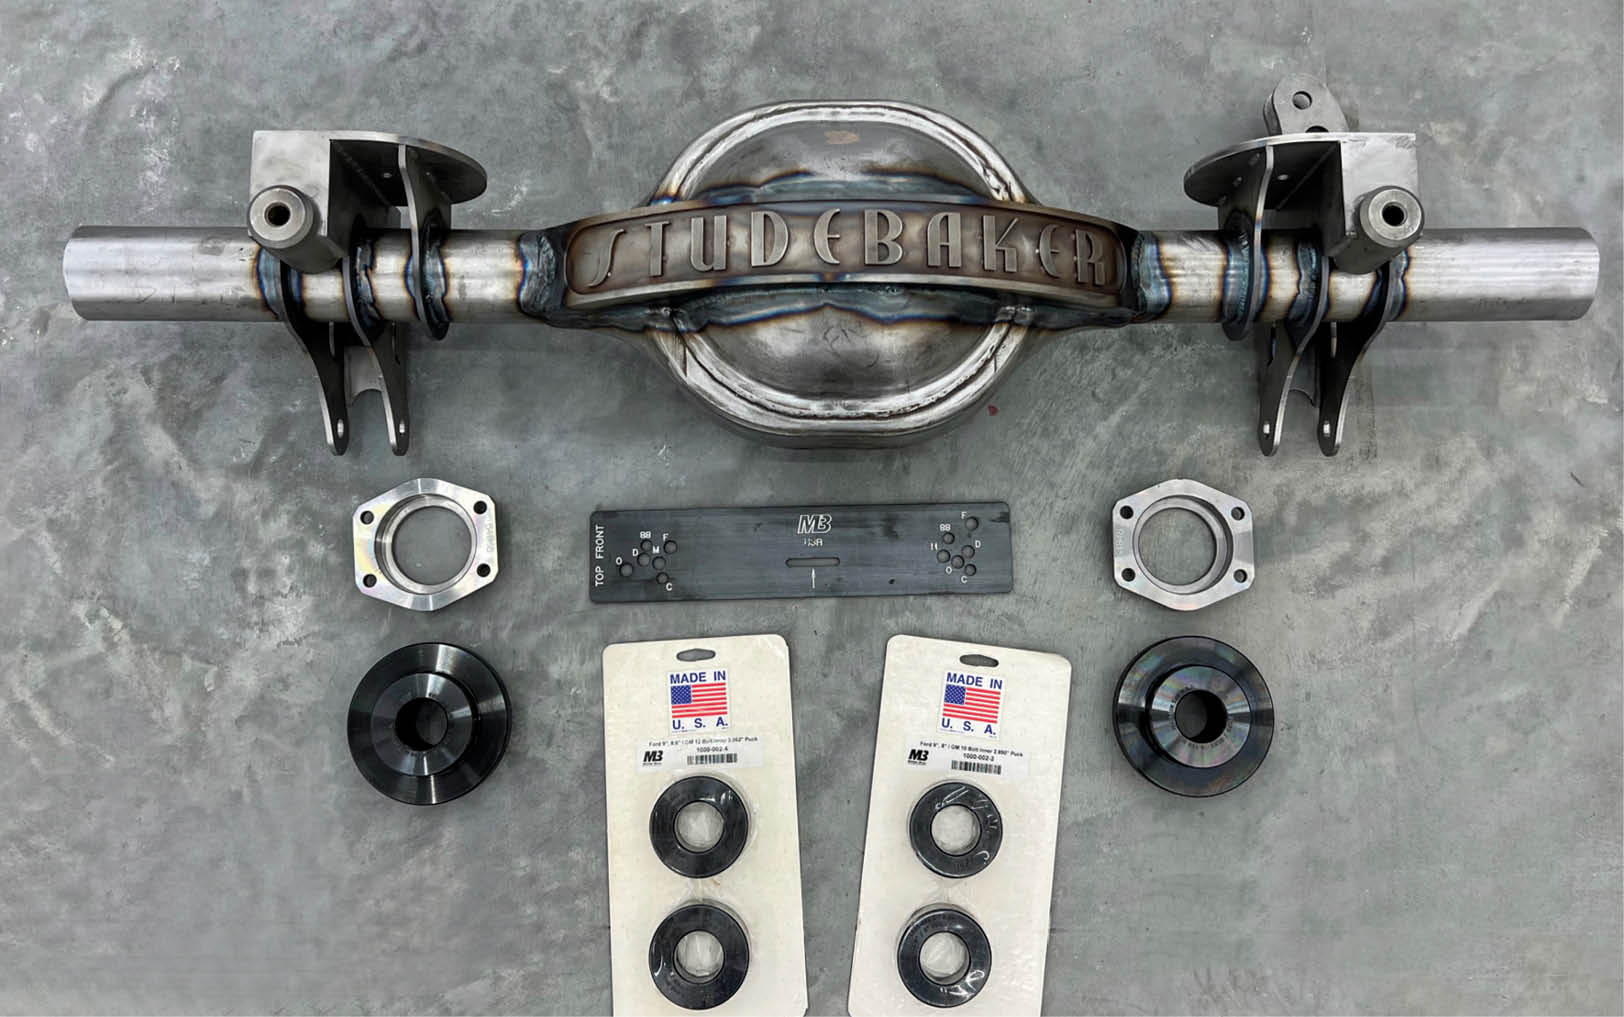 The ends were trimmed off the axle housing and the brackets were slipped into place. After careful fitting they were finish welded. Some components of the Mittler Bros. axle narrowing kit are shown.